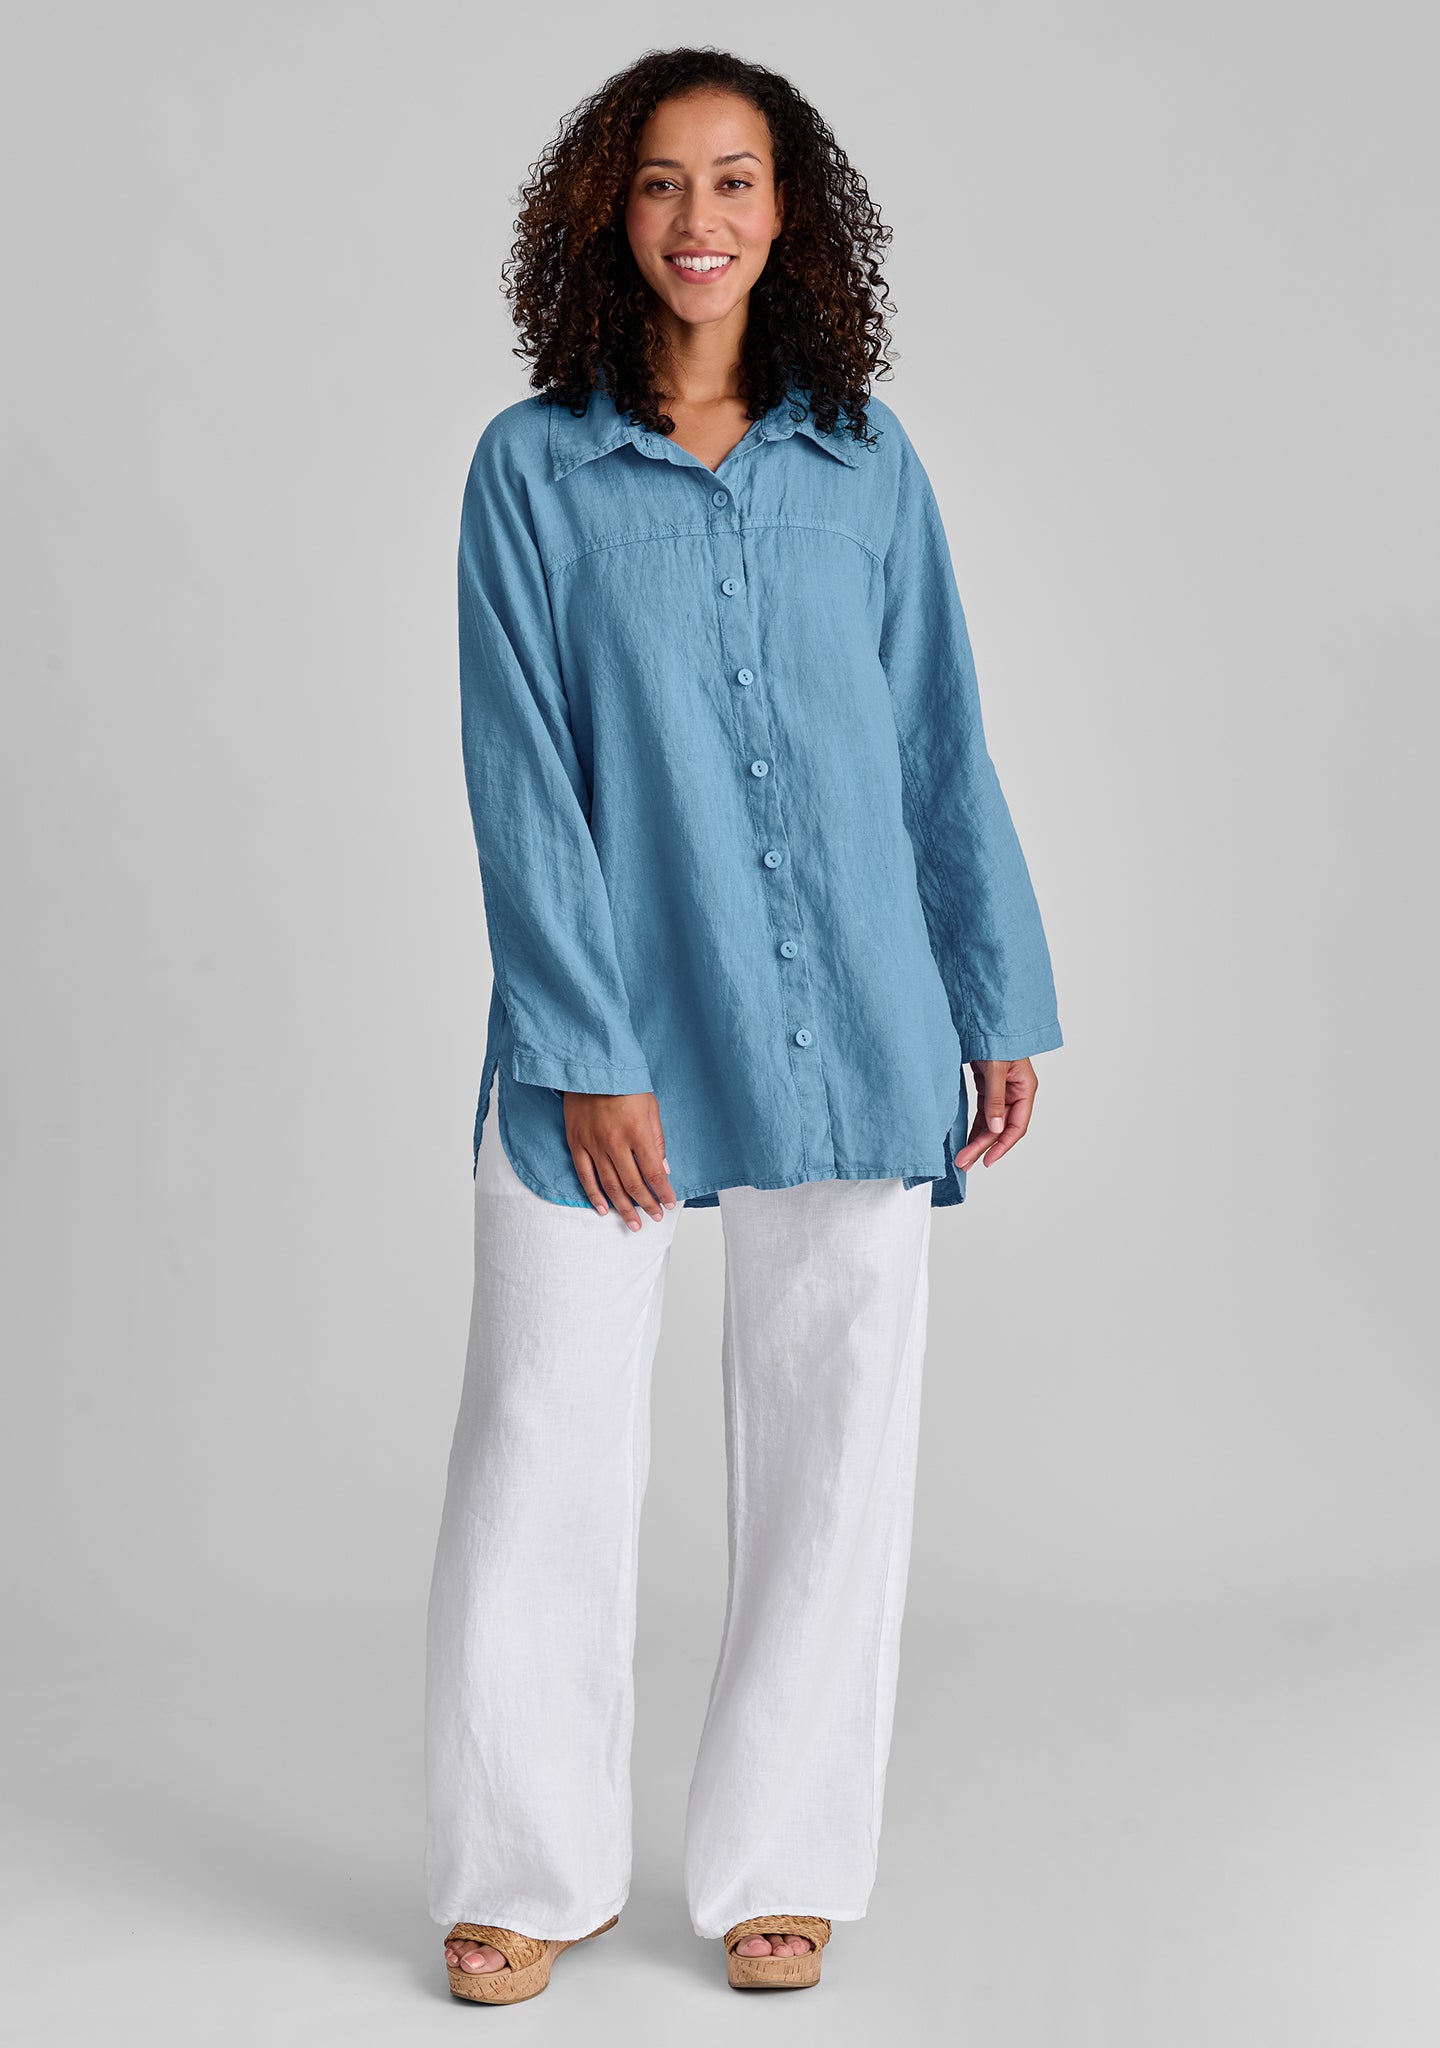 FLAX linen blouse in blue with linen pants in white